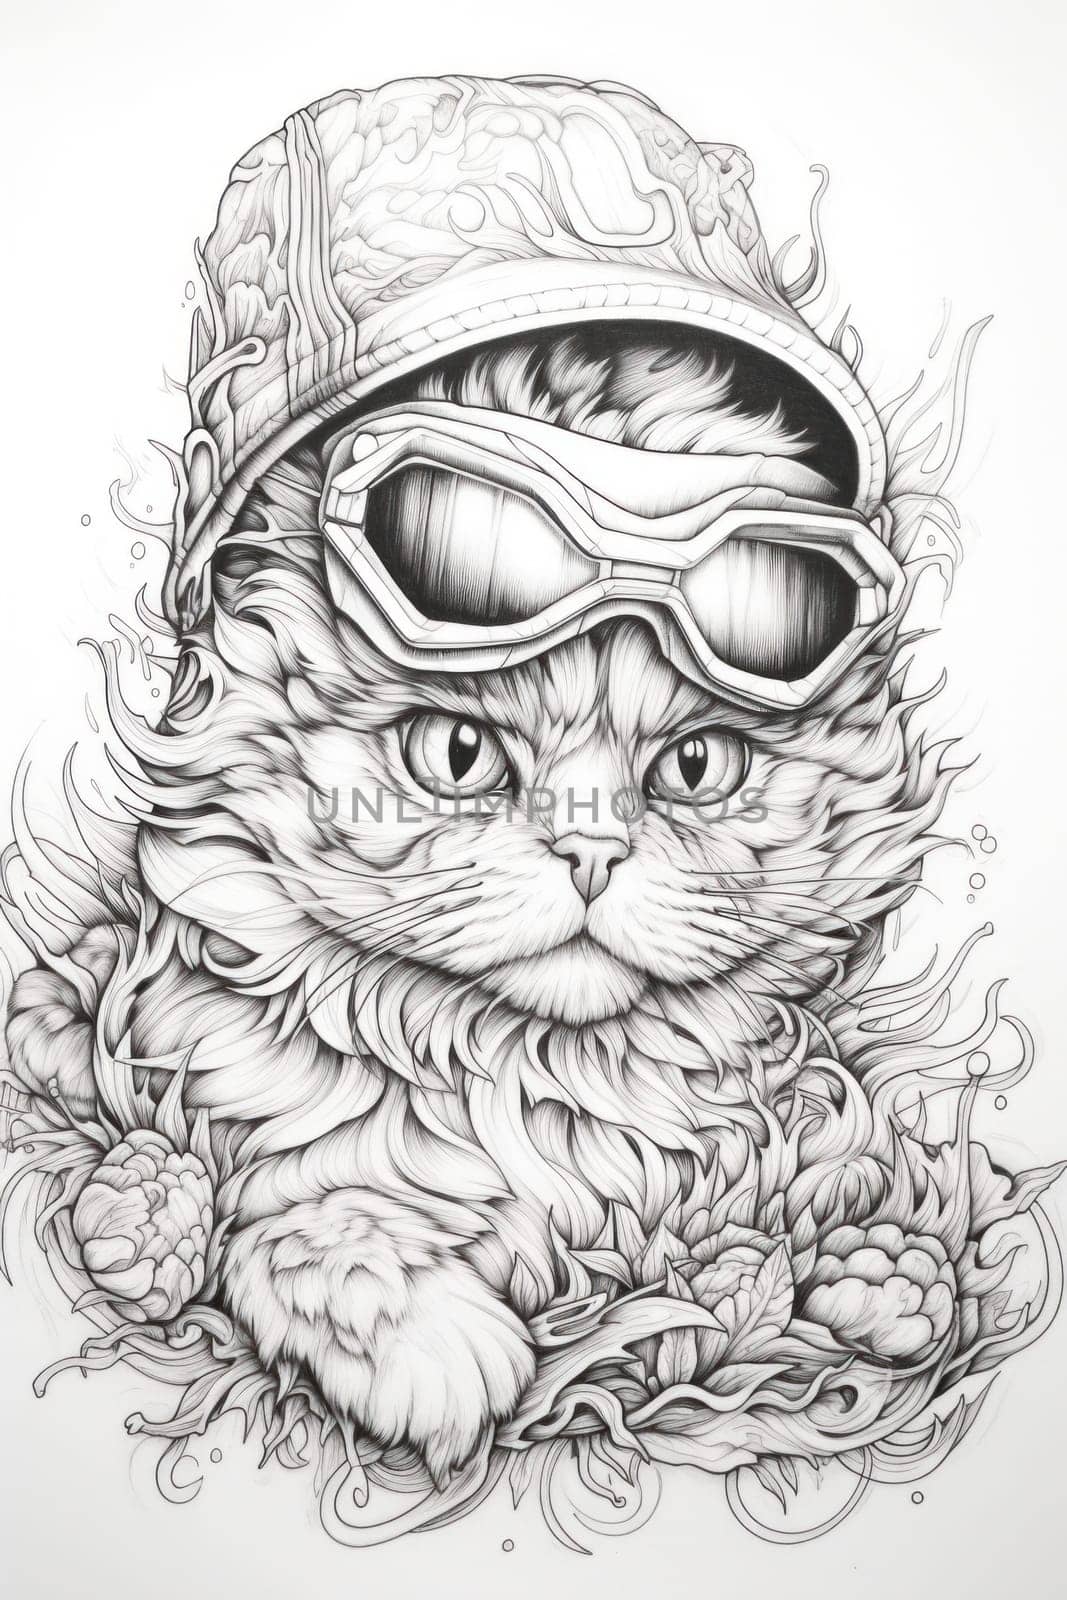 A drawing of a cat wearing a motorcycle helmet